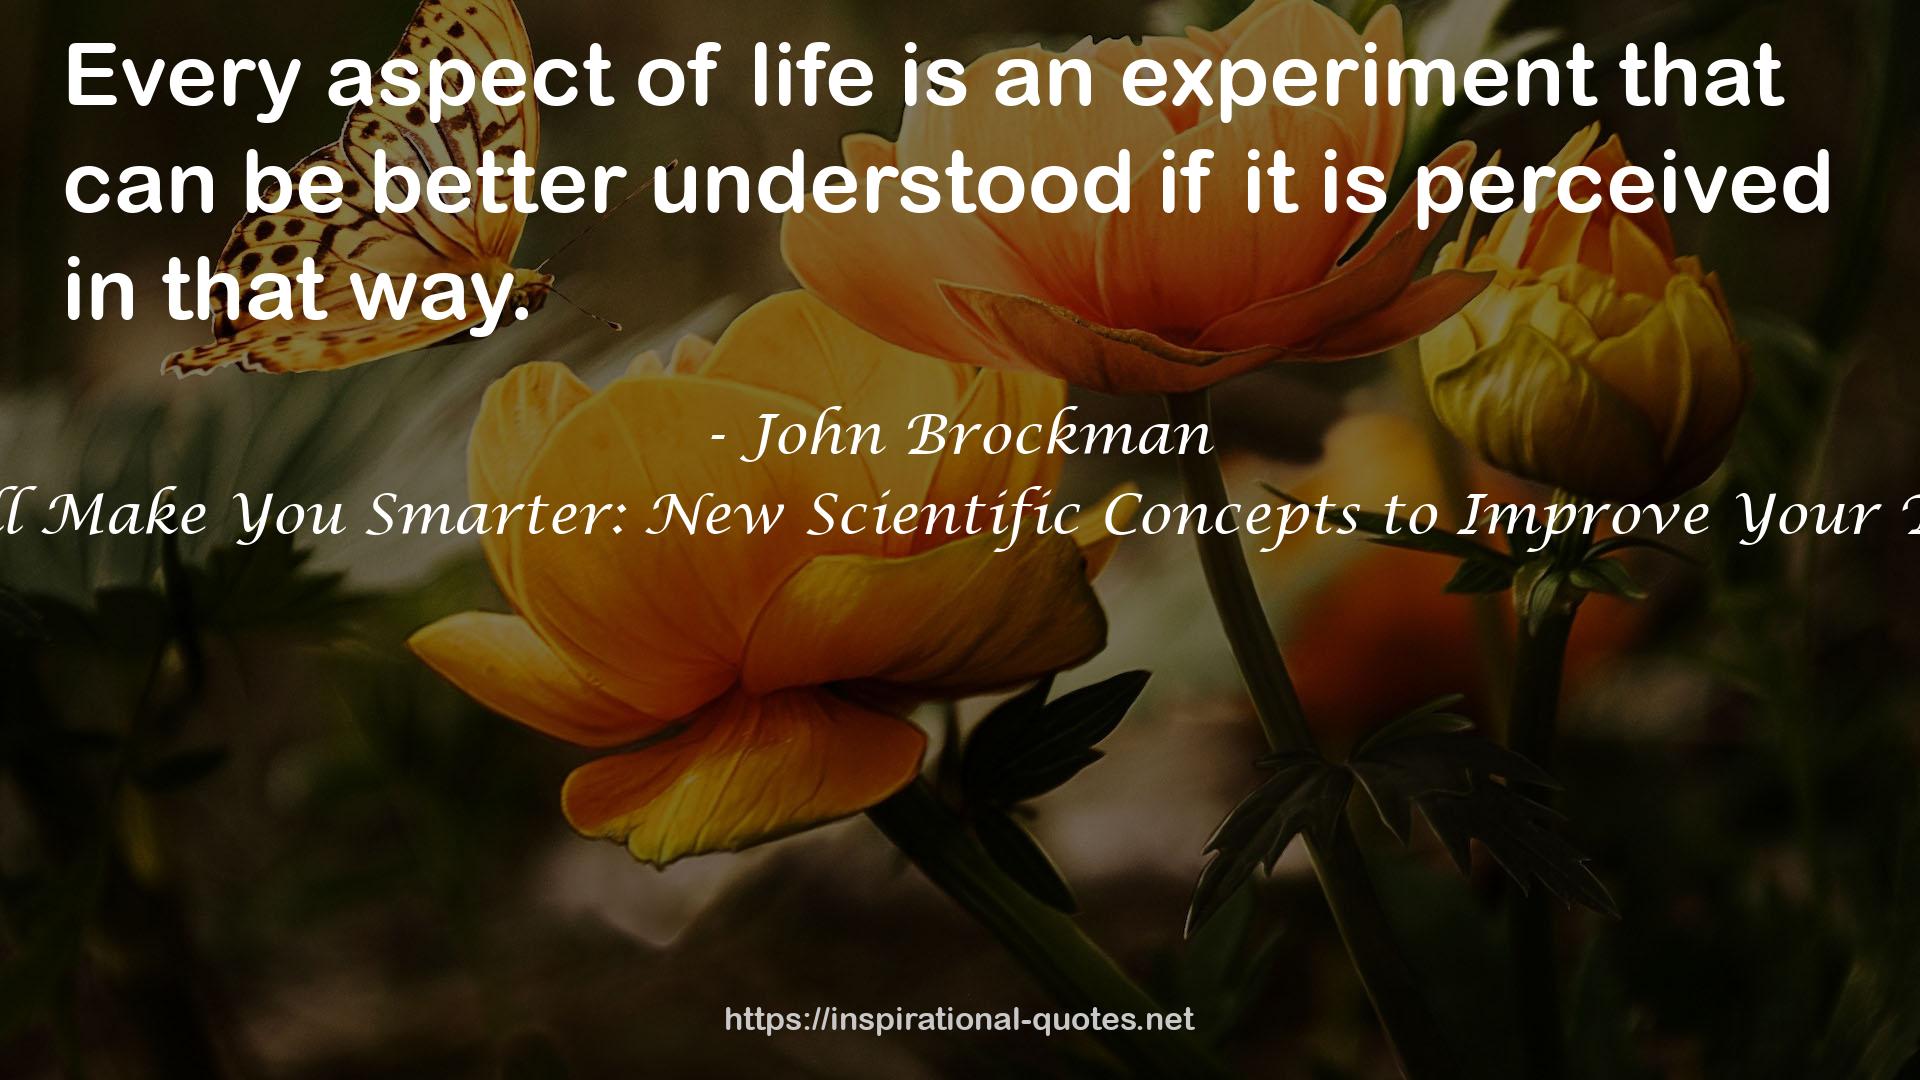 This Will Make You Smarter: New Scientific Concepts to Improve Your Thinking QUOTES